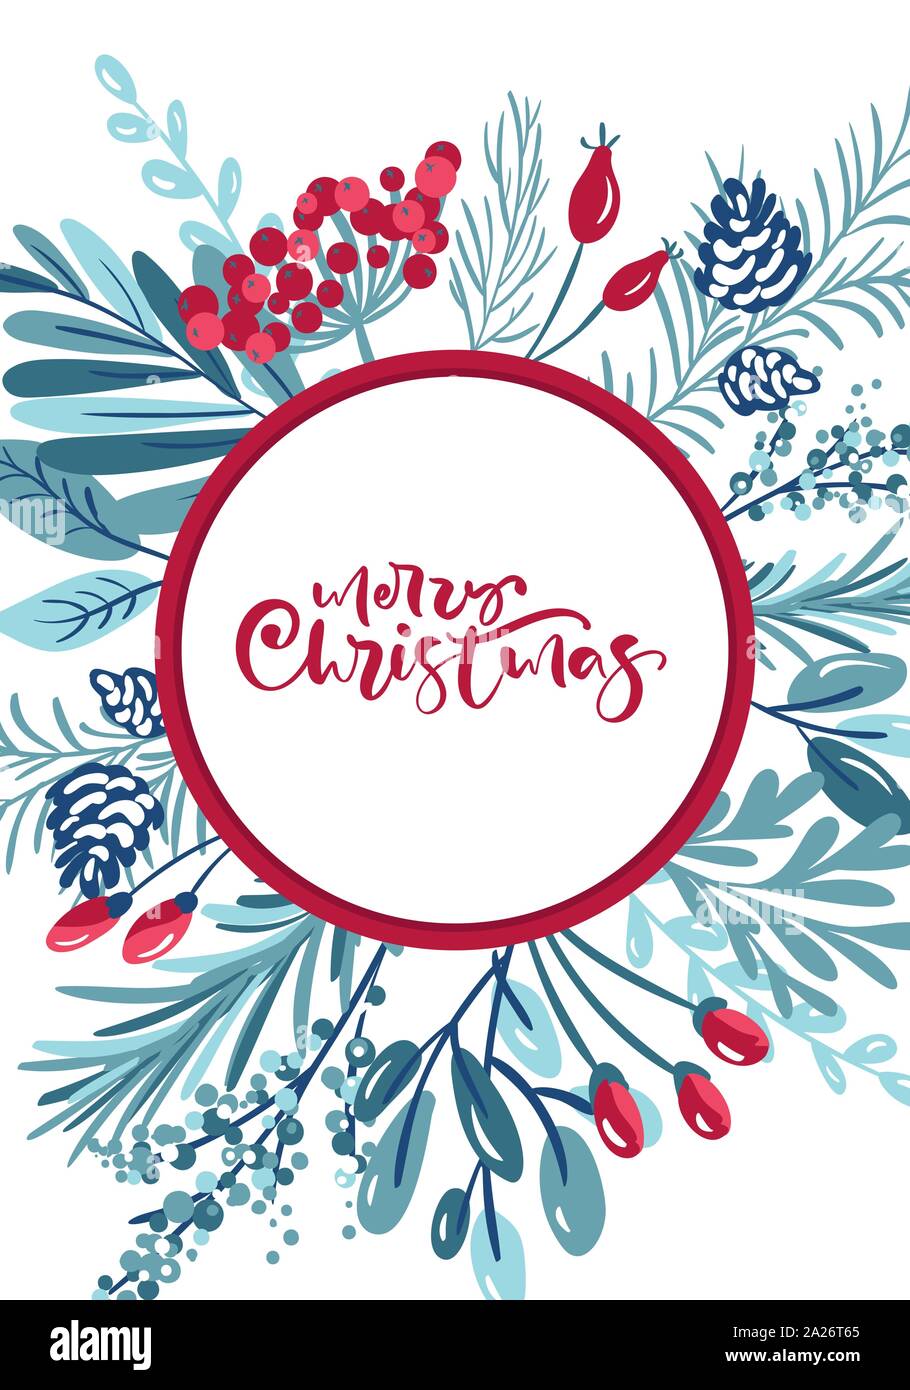 Merry Christmas calligraphic lettering hand written text. Greeting card design with floral and berries xmas elements. Modern winter season postcard Stock Vector